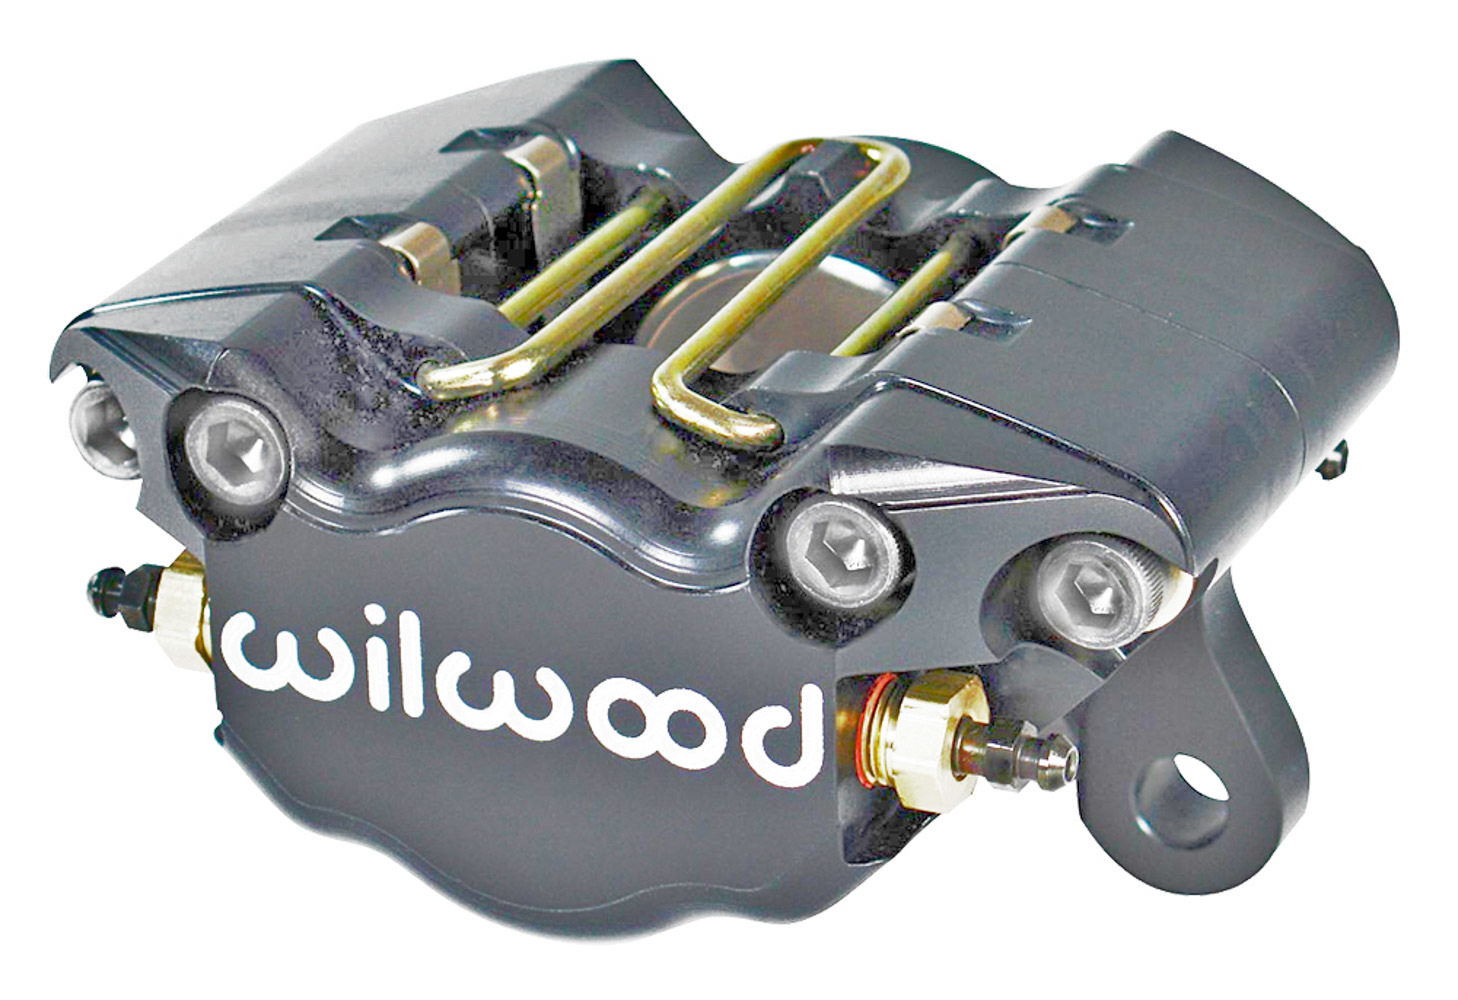 Brake Caliper - Dynapro - 2 Piston - Billet Aluminum - Gray Anodized - 13.000 in OD x 0.200 in Thick Rotor - 3.750 in Lug Mount - Each